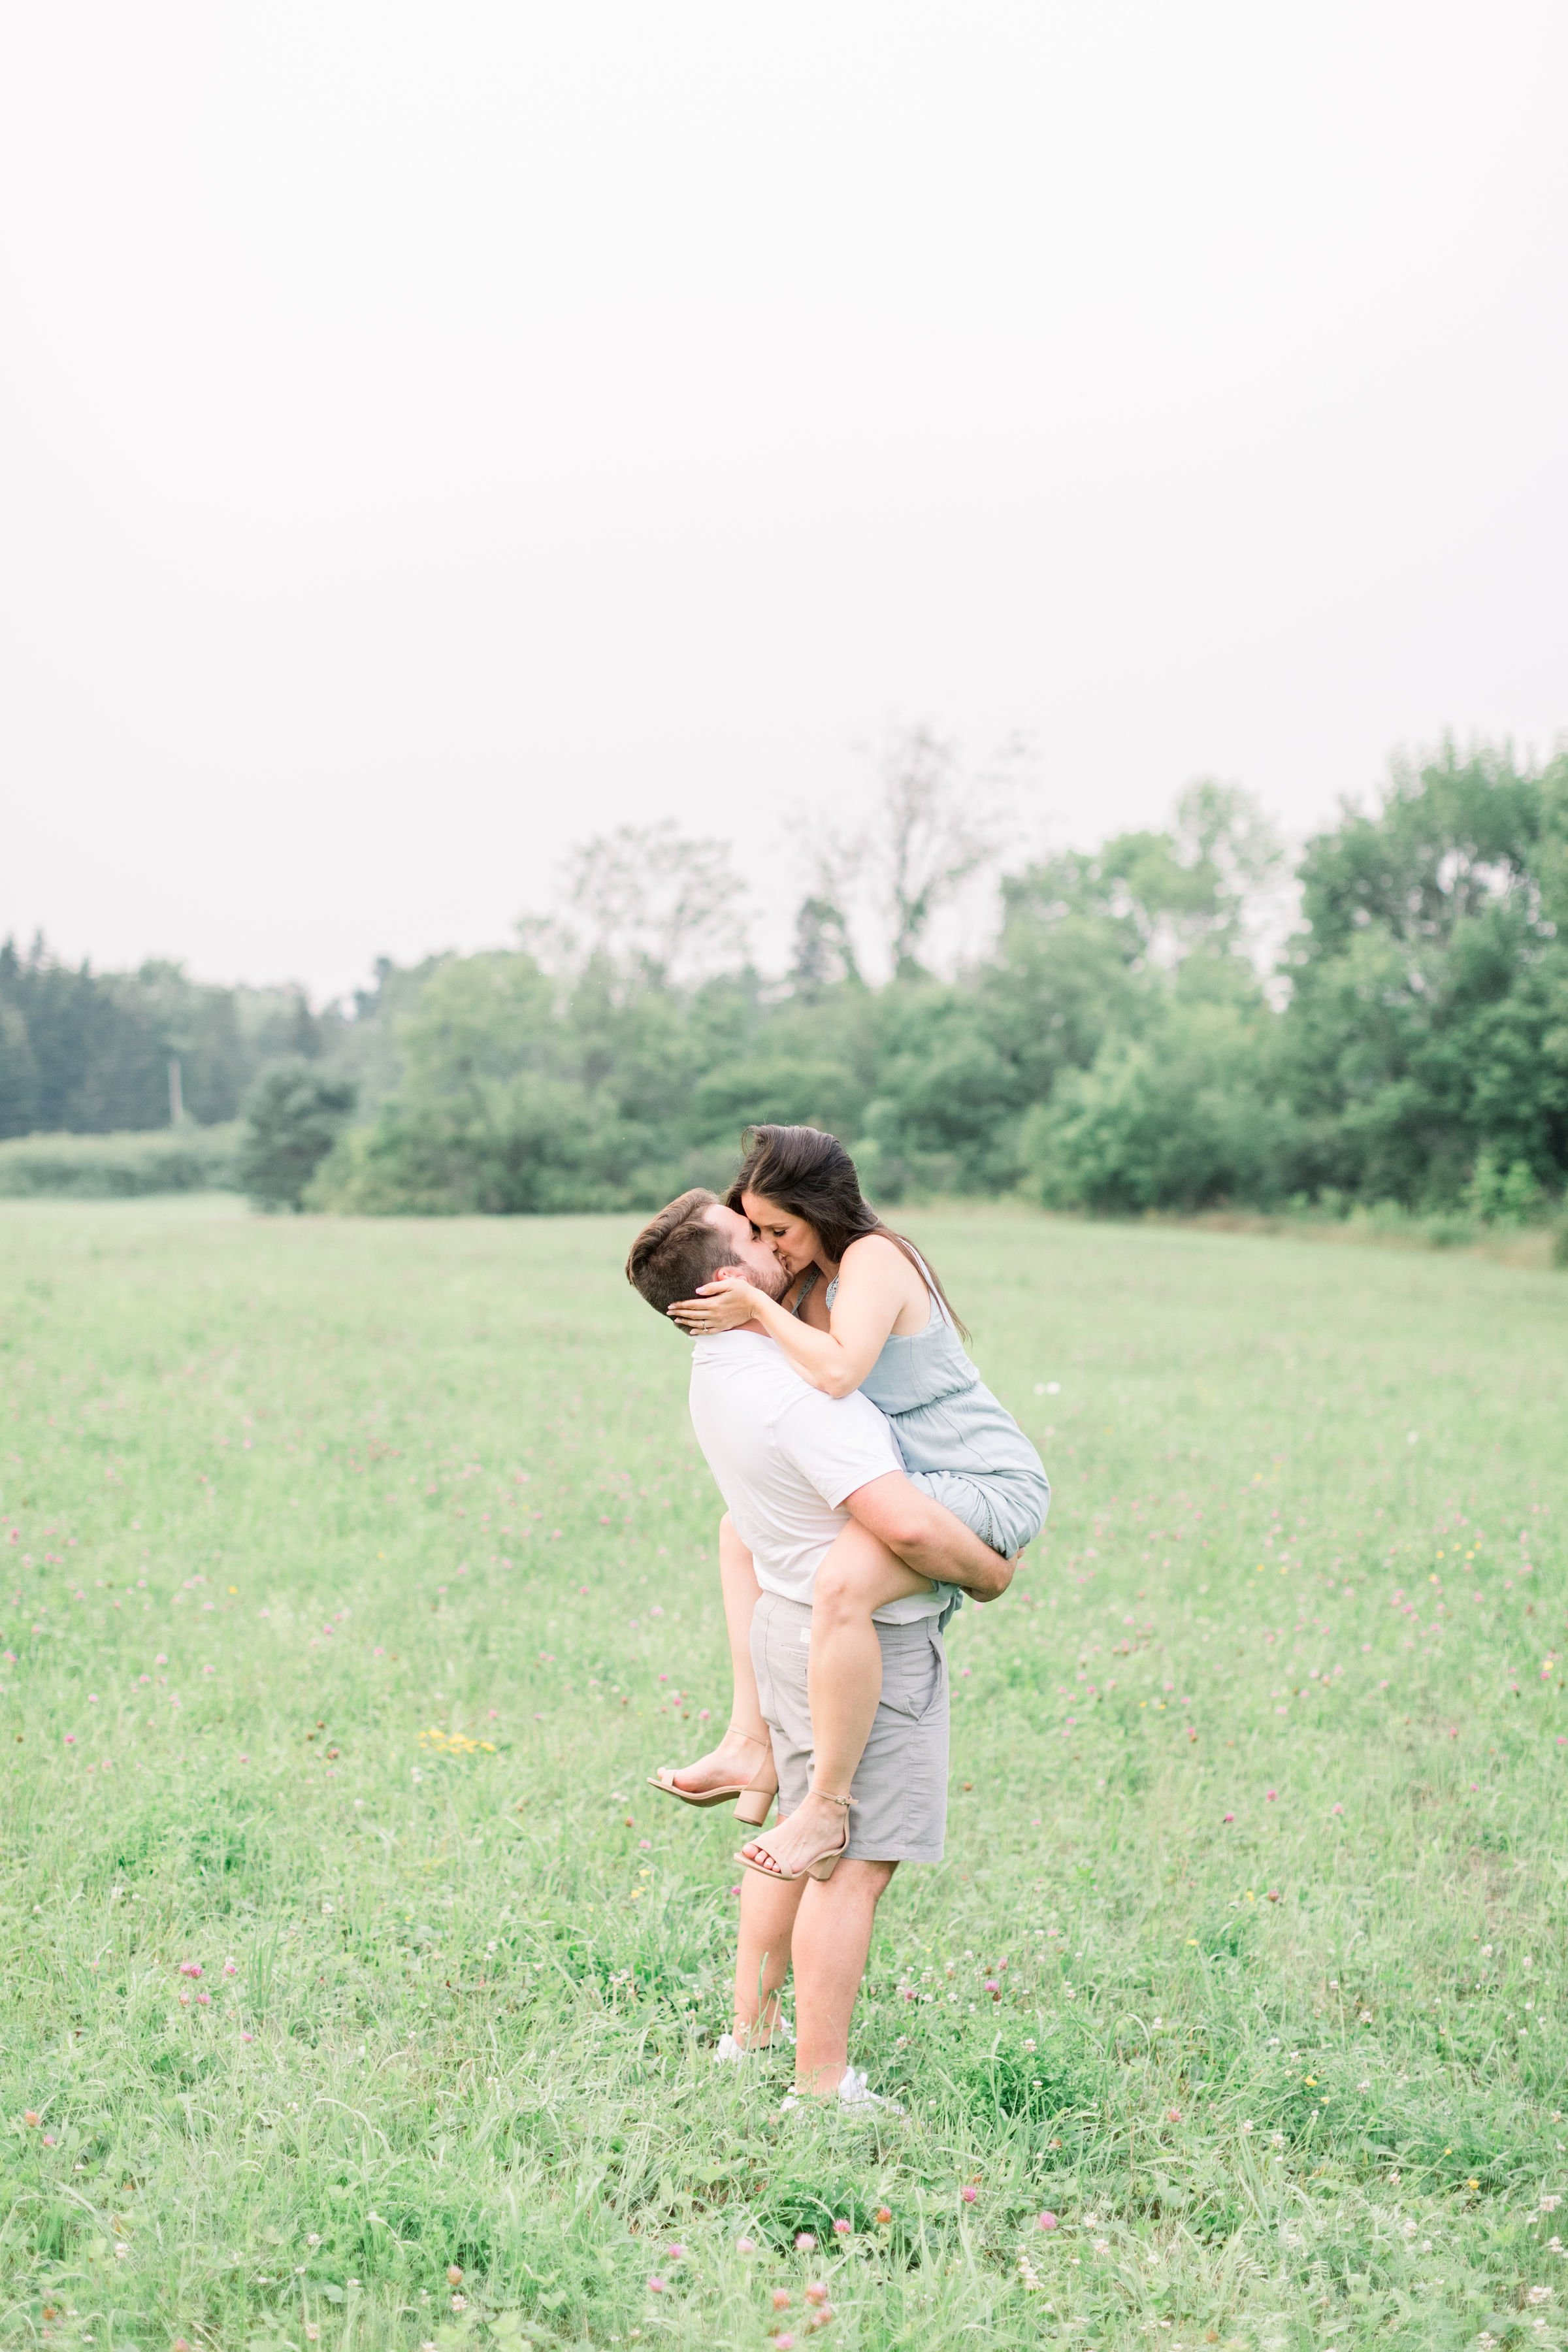  A newly engaged couple kiss passionately in a wild grass field in Kingston by Chelsea Mason Photography. holding her #Kingstonengagementlocation #GrassCreekParkPortraits #Ontarioengagementphotographer #Chelseamasonphotography #Chelseamasonengagement